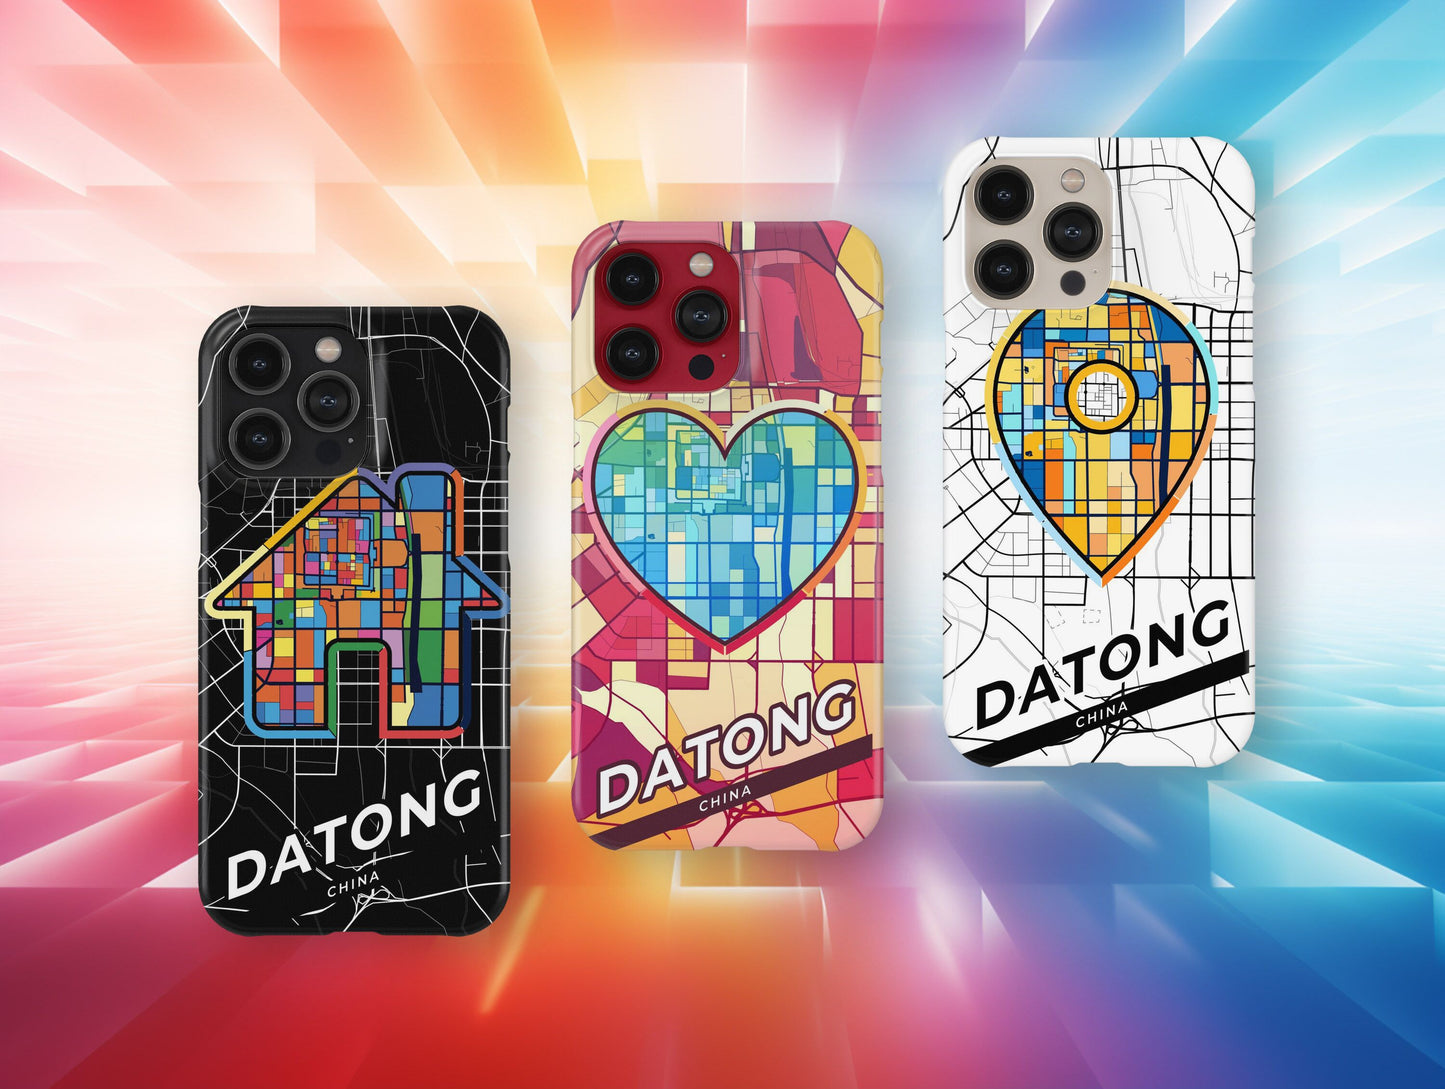 Datong China slim phone case with colorful icon. Birthday, wedding or housewarming gift. Couple match cases.